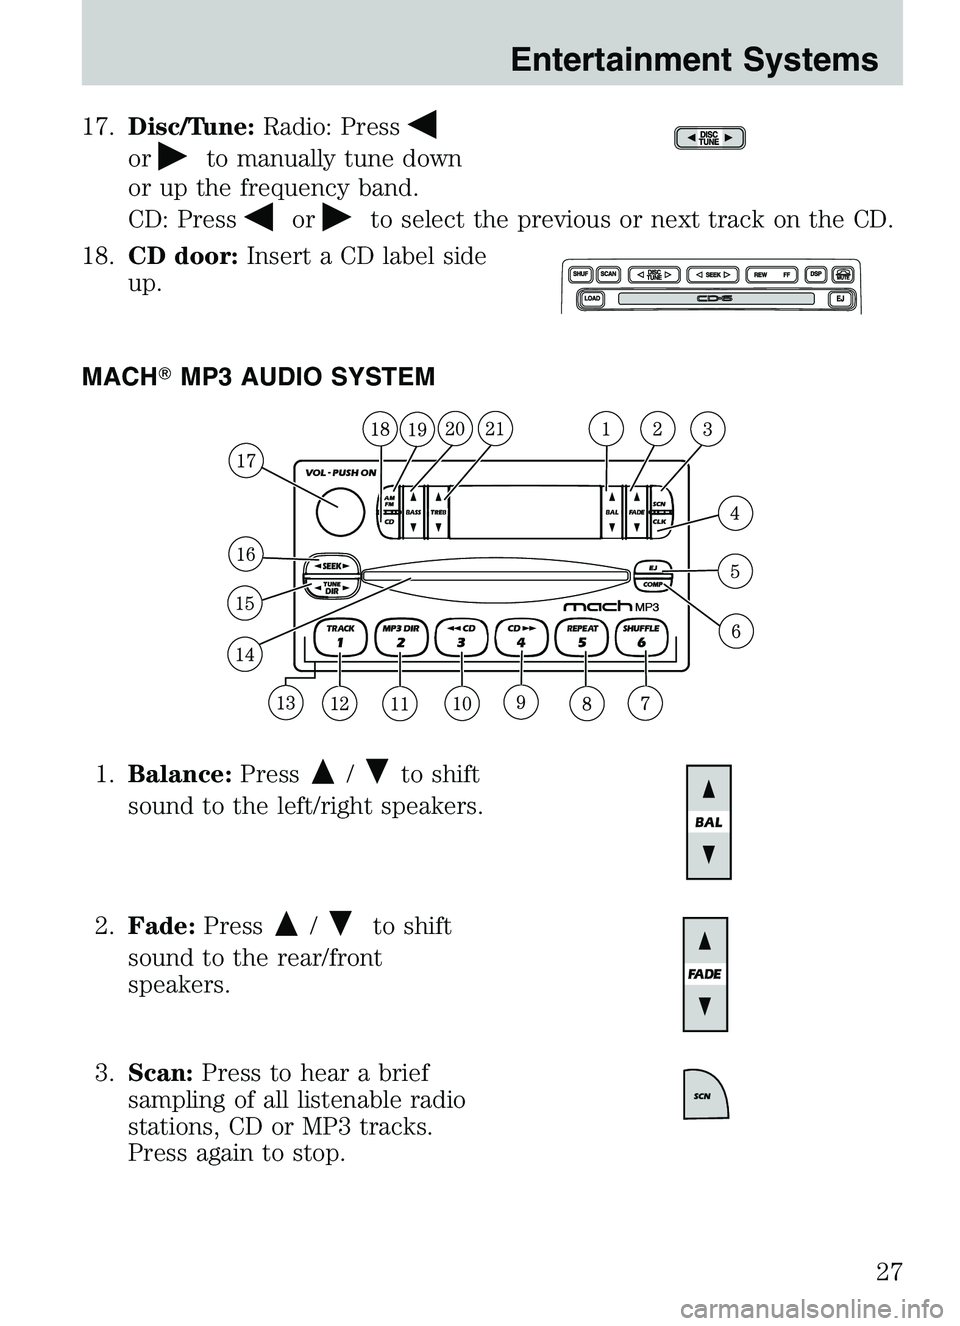 MAZDA MODEL B4000 4WD 2003 Owners Manual 17.Disc/Tune: Radio: Press
orto manually tune down
or up the frequency band.
CD: Press
orto select the previous or next track on the CD.
18. CD door: Insert a CD label side
up.
MACH MP3 AUDIO SYSTEM
